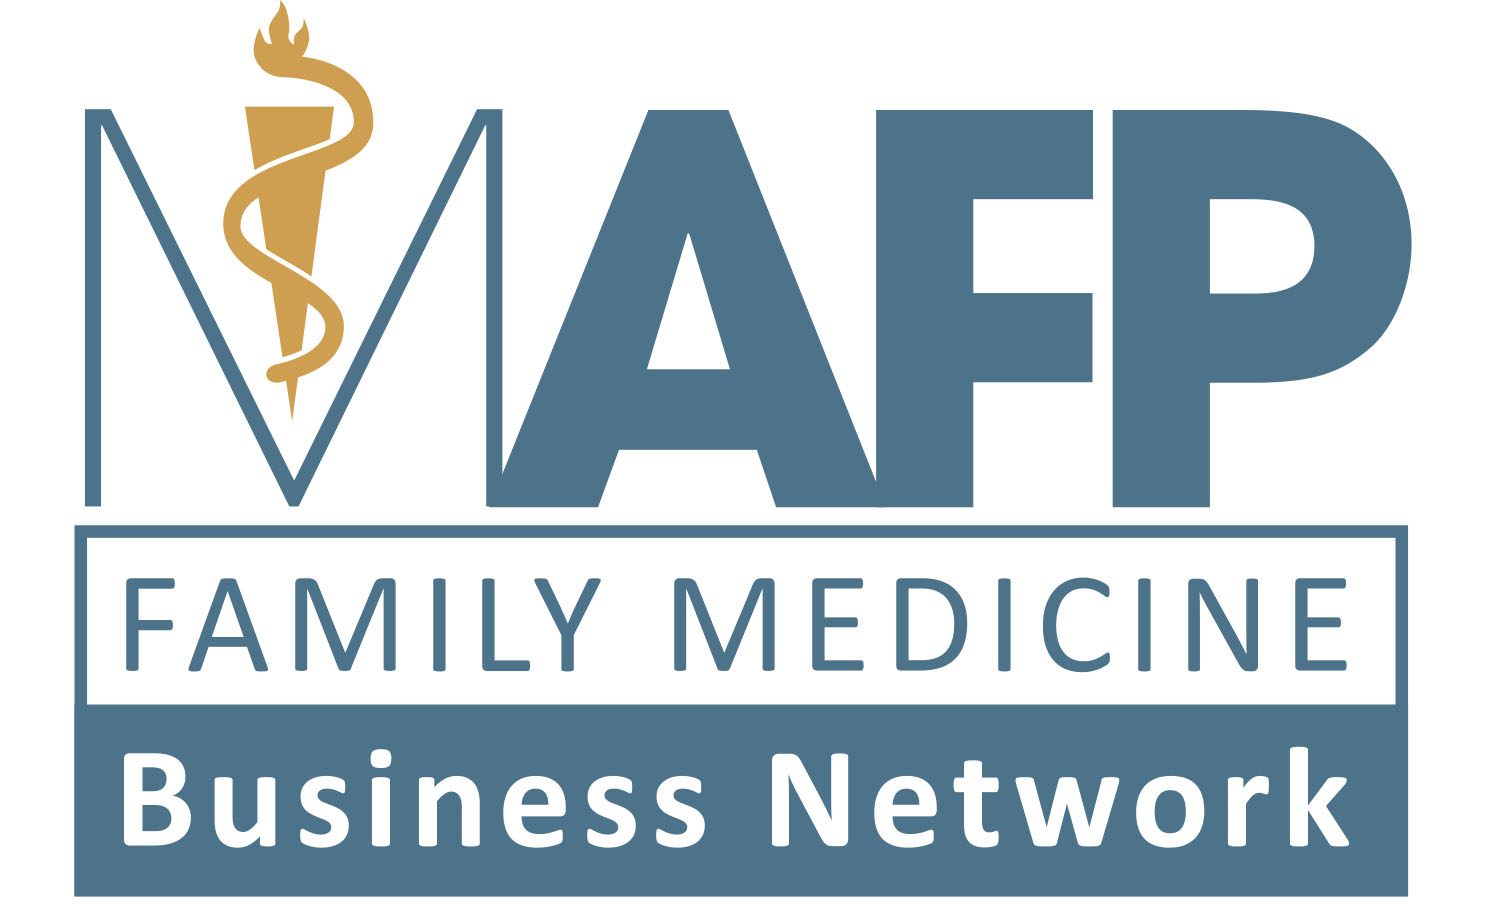 Family Medicine Business Network